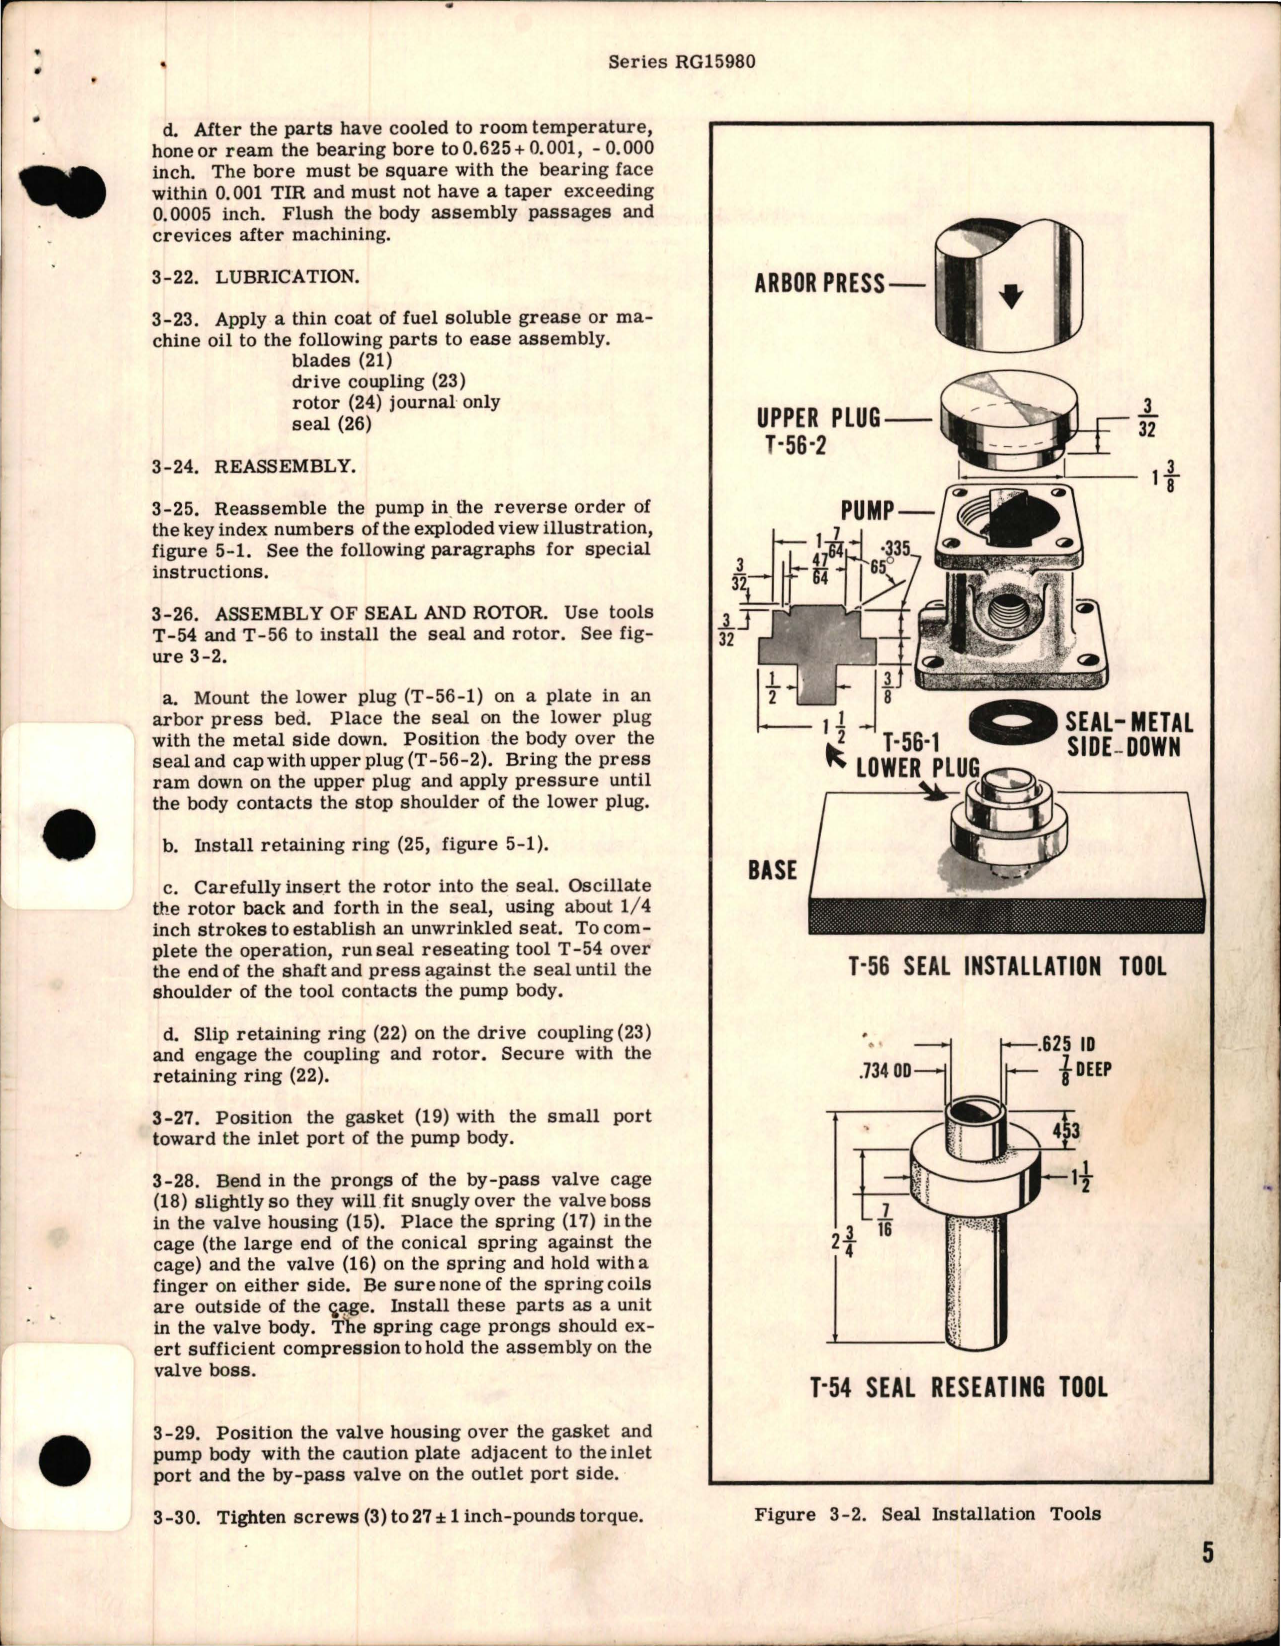 Sample page 5 from AirCorps Library document: Overhaul Instructions with Parts Breakdown for Aircraft Engine Fuel Pump - Series RG15980 